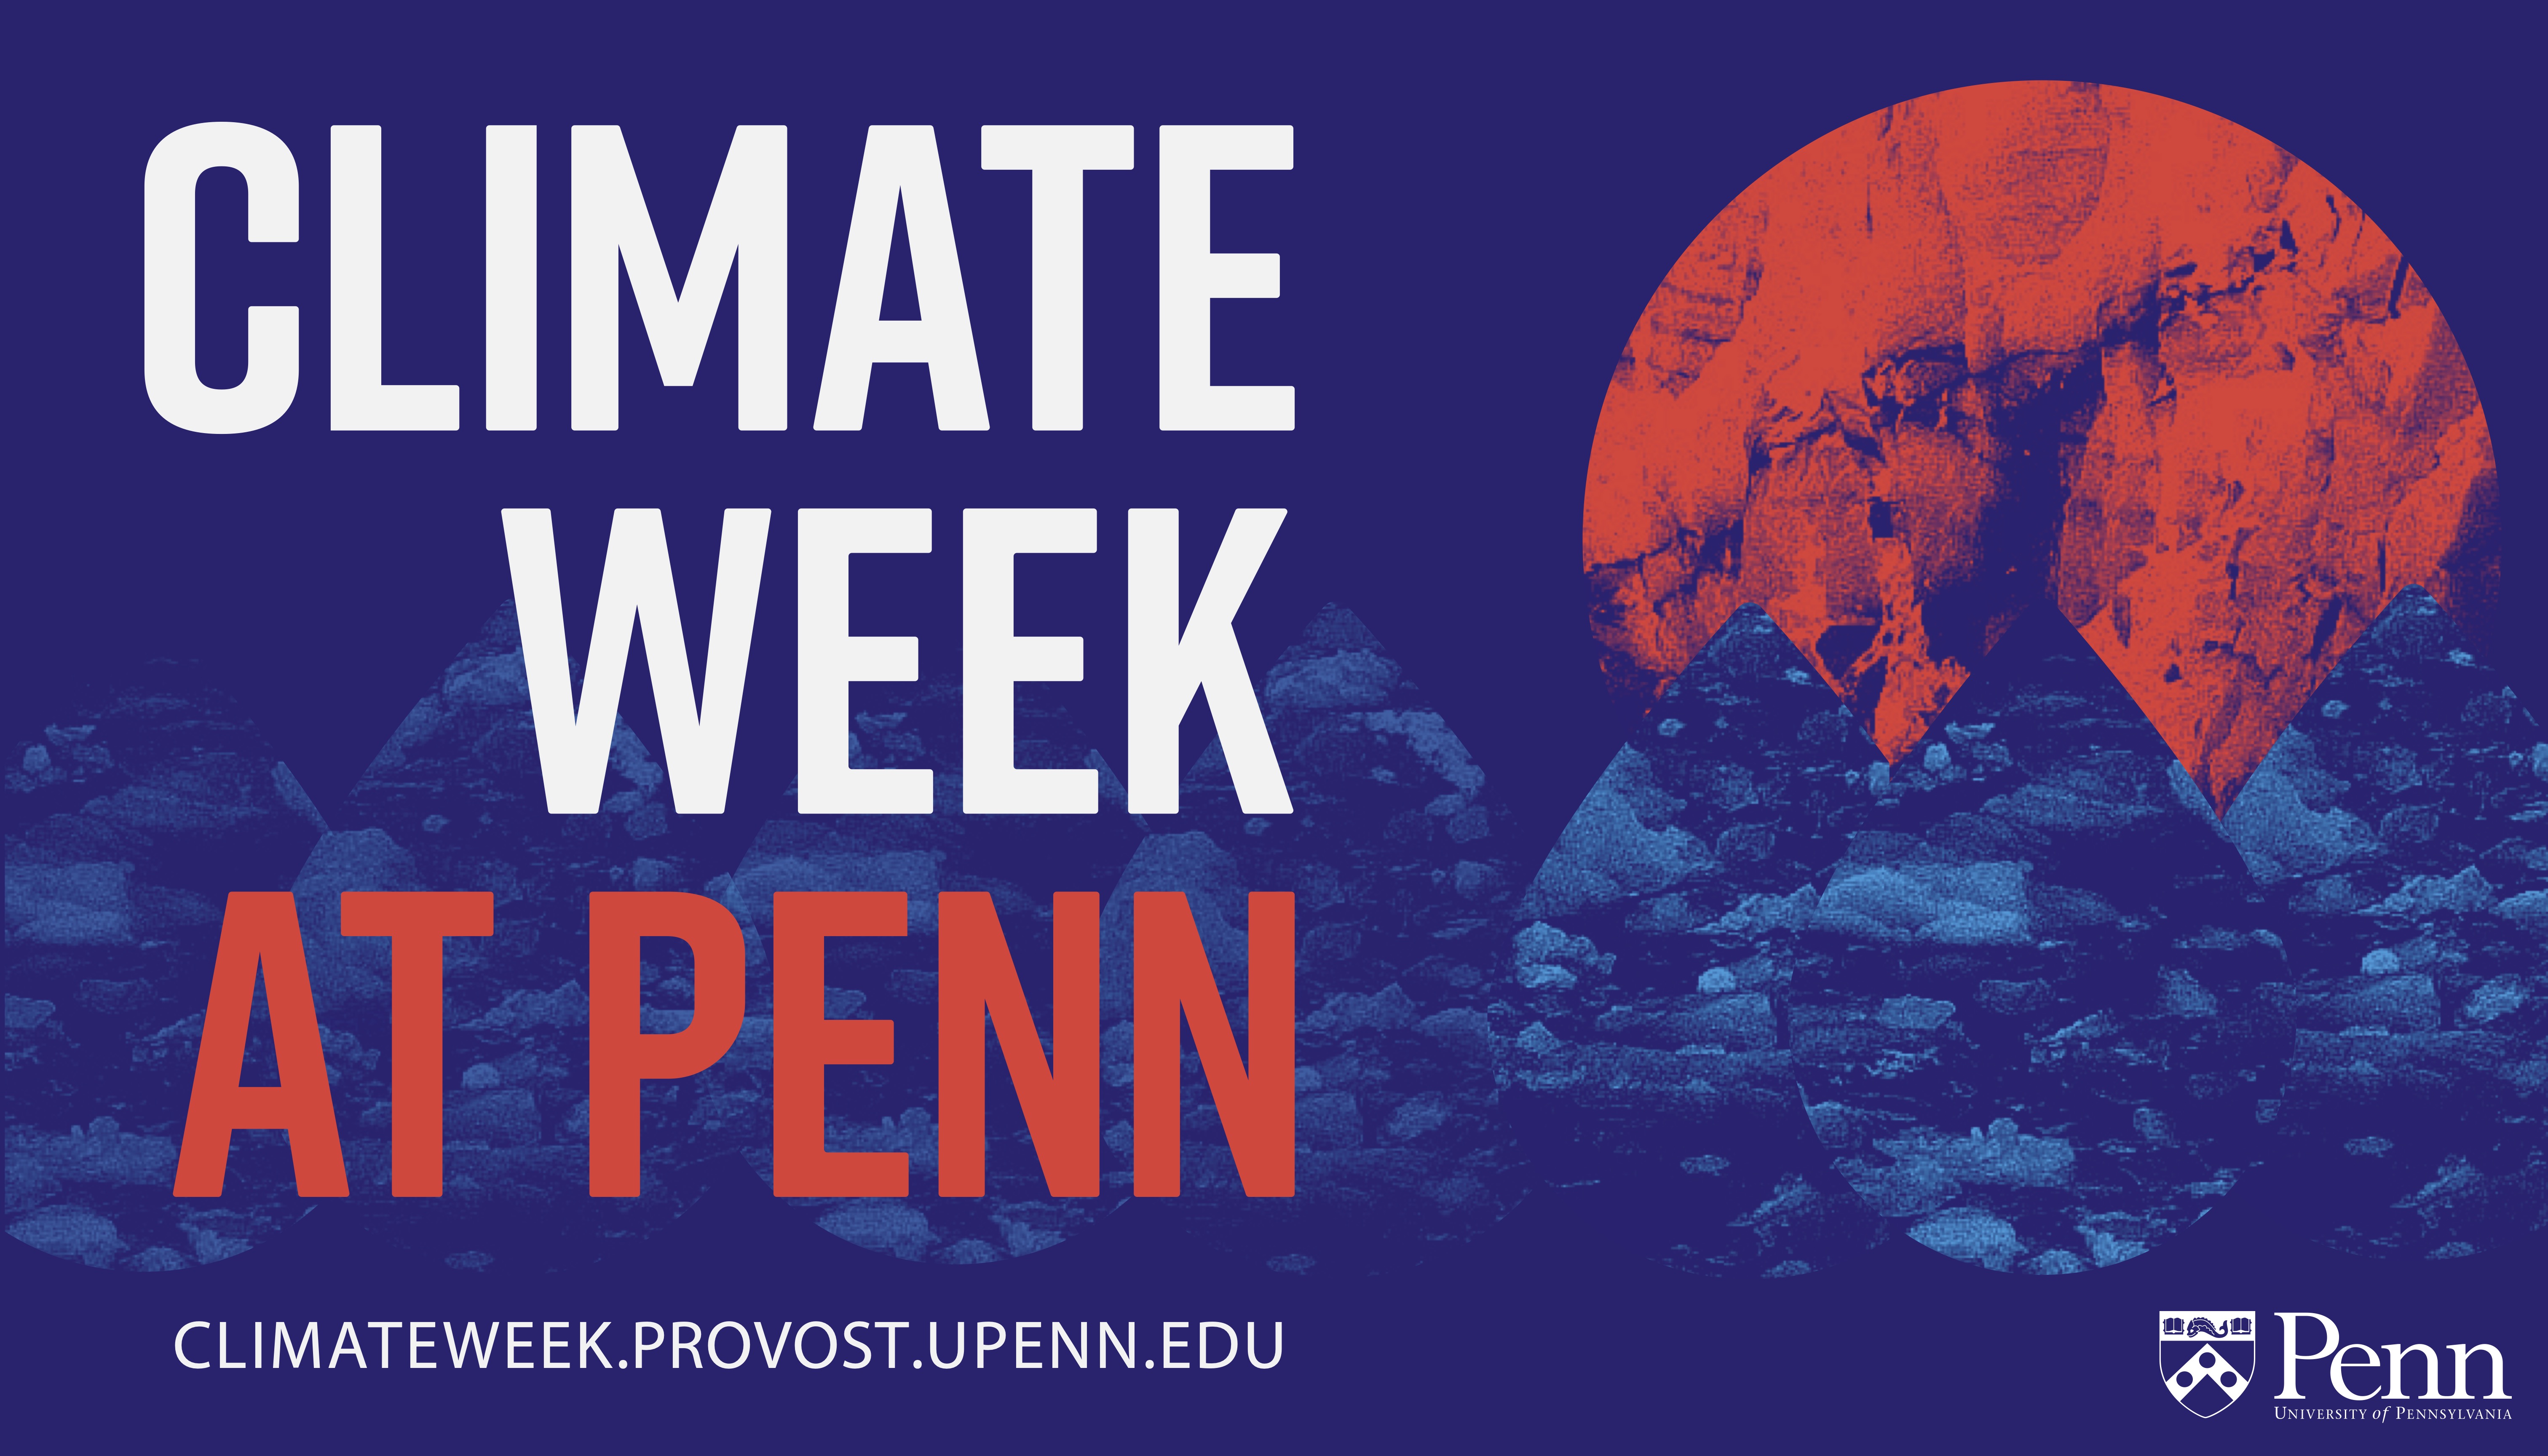 Banner that says Climate Week at Penn with url climateweek.provost.upenn.edu against a backdrop of abstract water droplets and sun